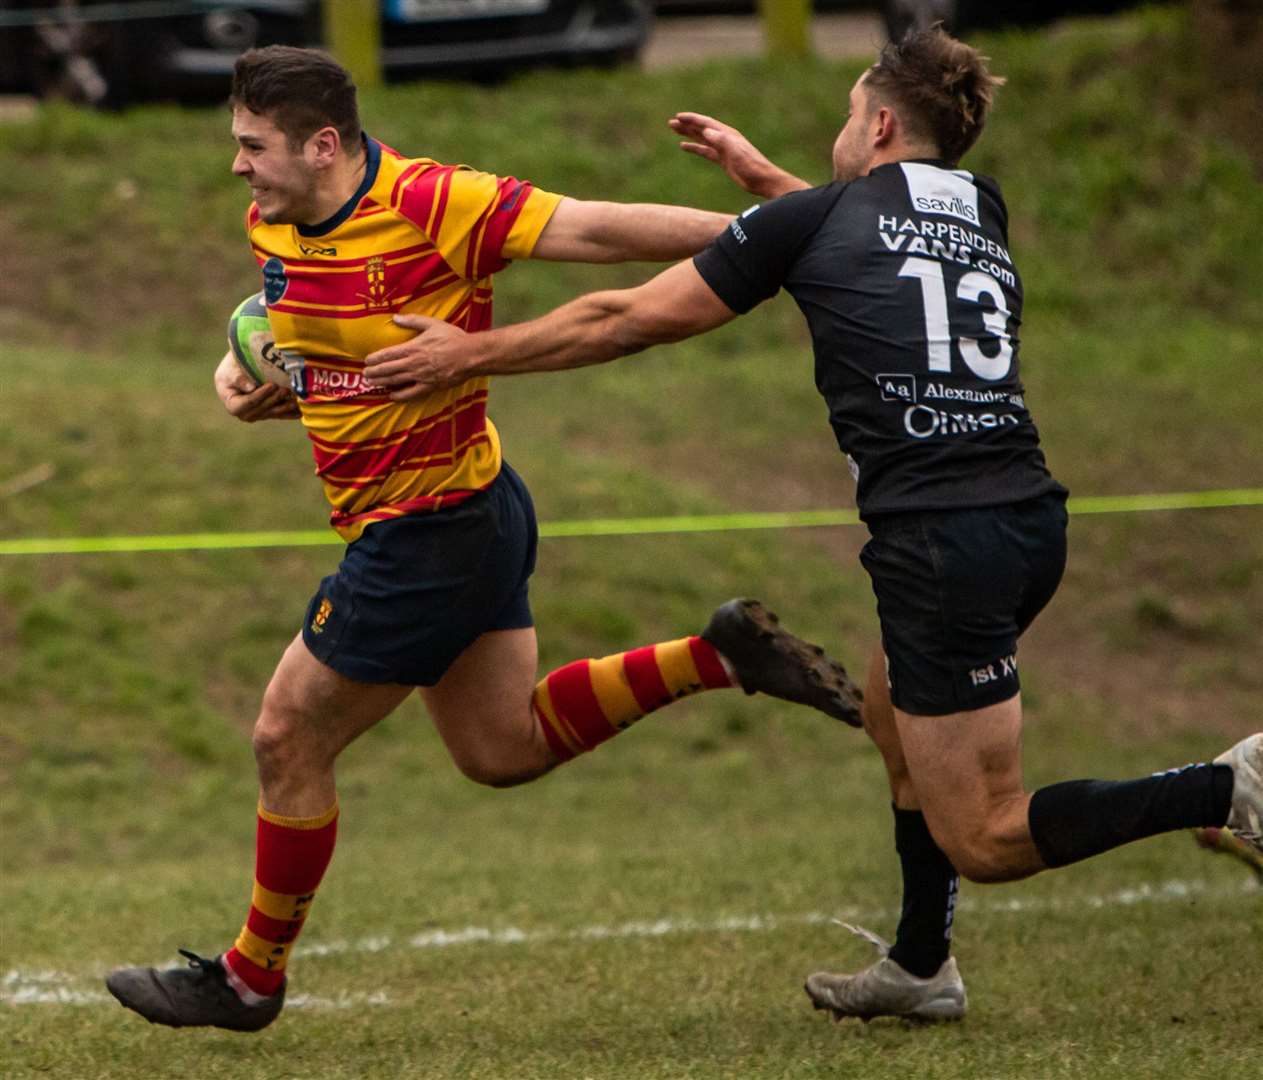 Medway's Ollie Newton on his way to a try against Harpenden. Picture: Jake Miles Sports Photography